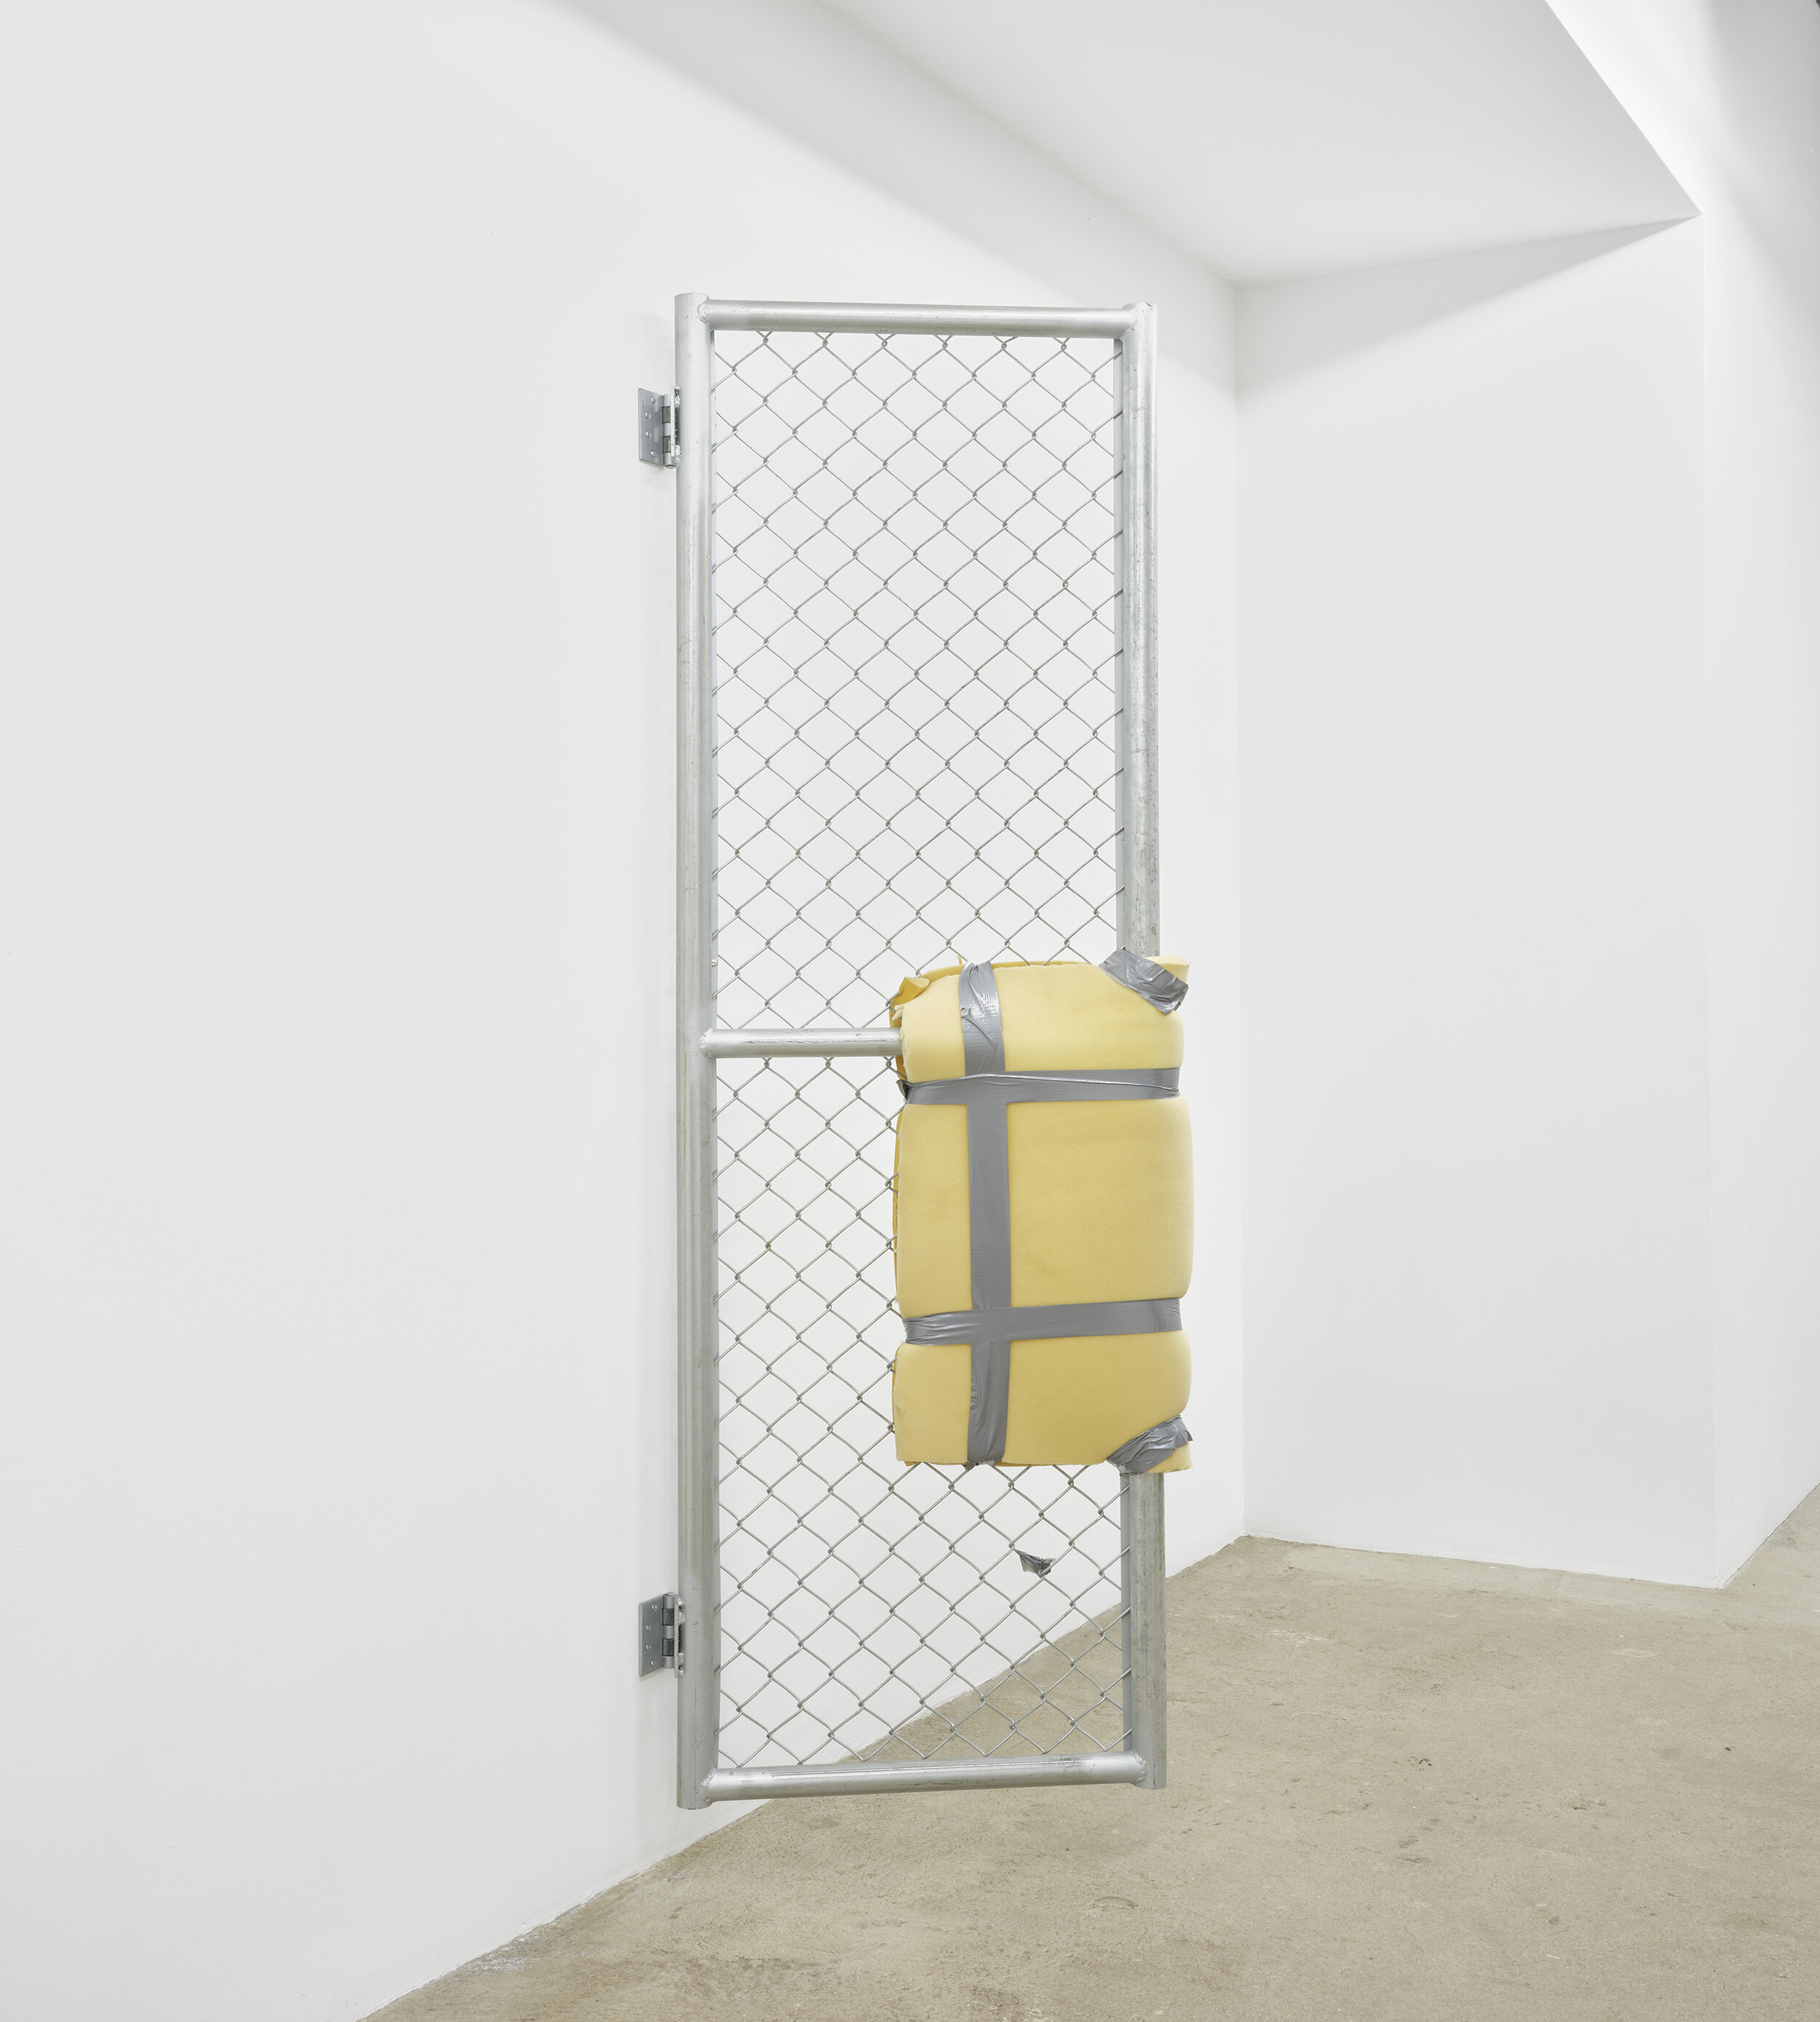  Bat-Ami Rivlin  Untitled (metal gate, yellow foam, duct tape) , 2019   chain link fencing, metal frame, hinges,   polyisocyanurate foam, duct tape, hardware 84&nbsp;1⁄2&nbsp;x 5 x 24 inches (215 x 8 x 61 cm) BR3 